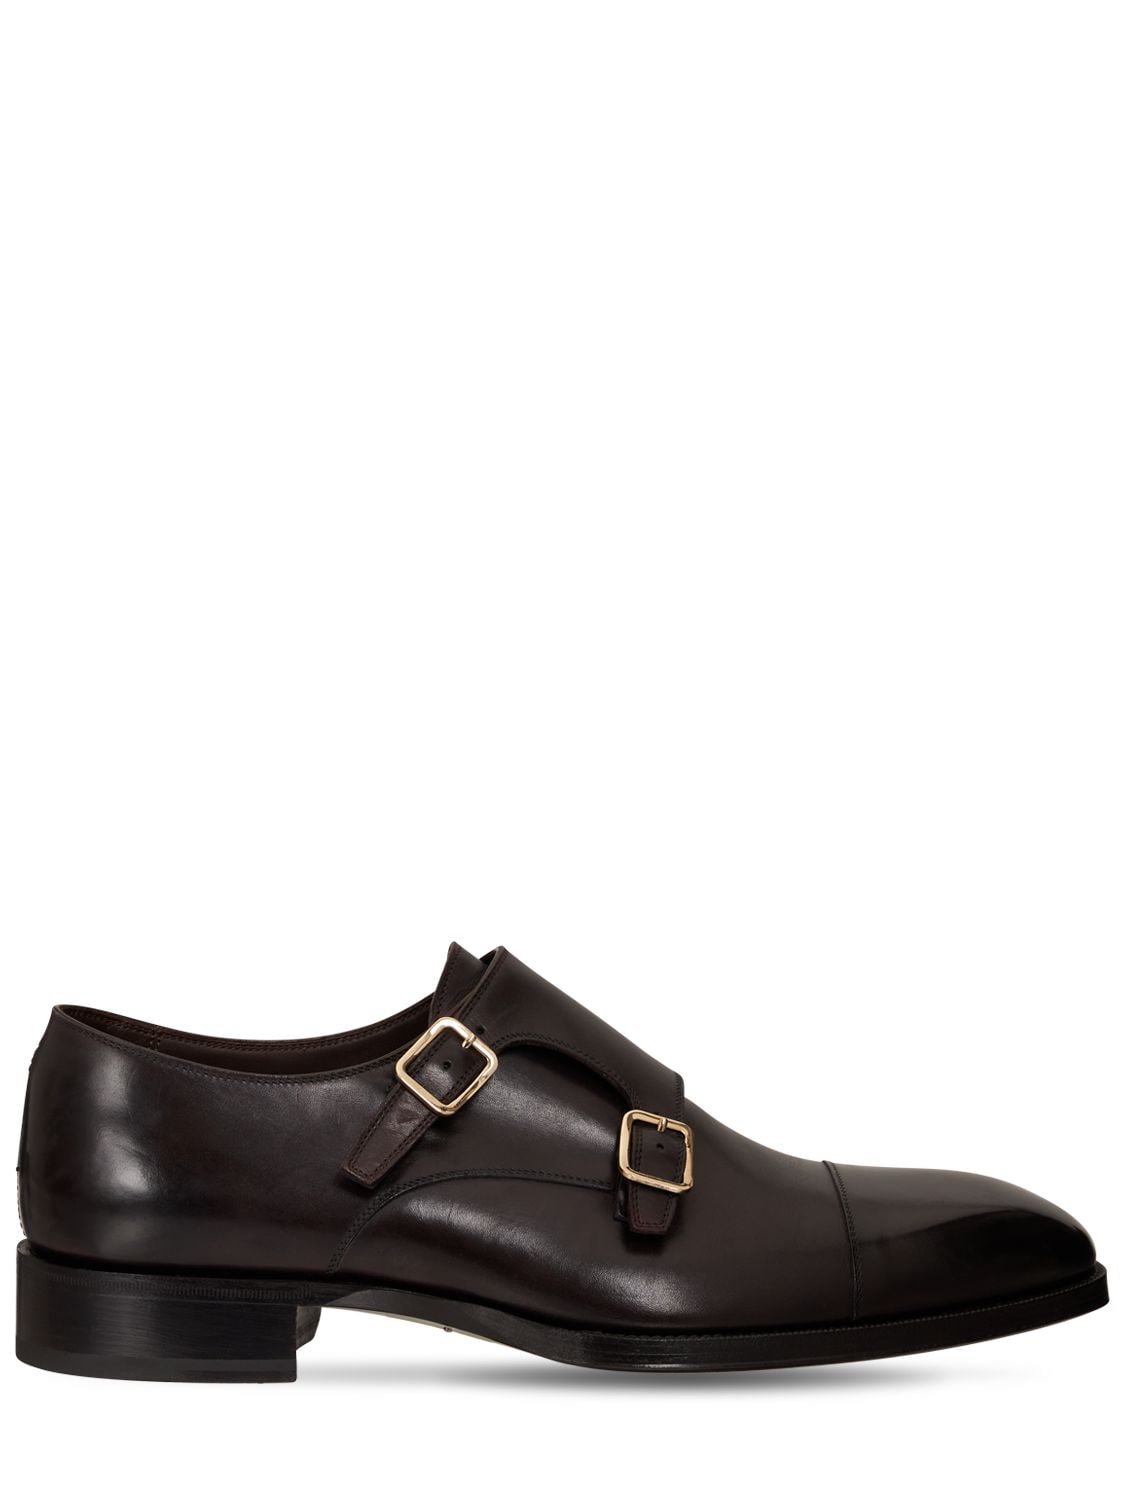 TOM FORD BURNISHED LEATHER MONK STRAP SHOES